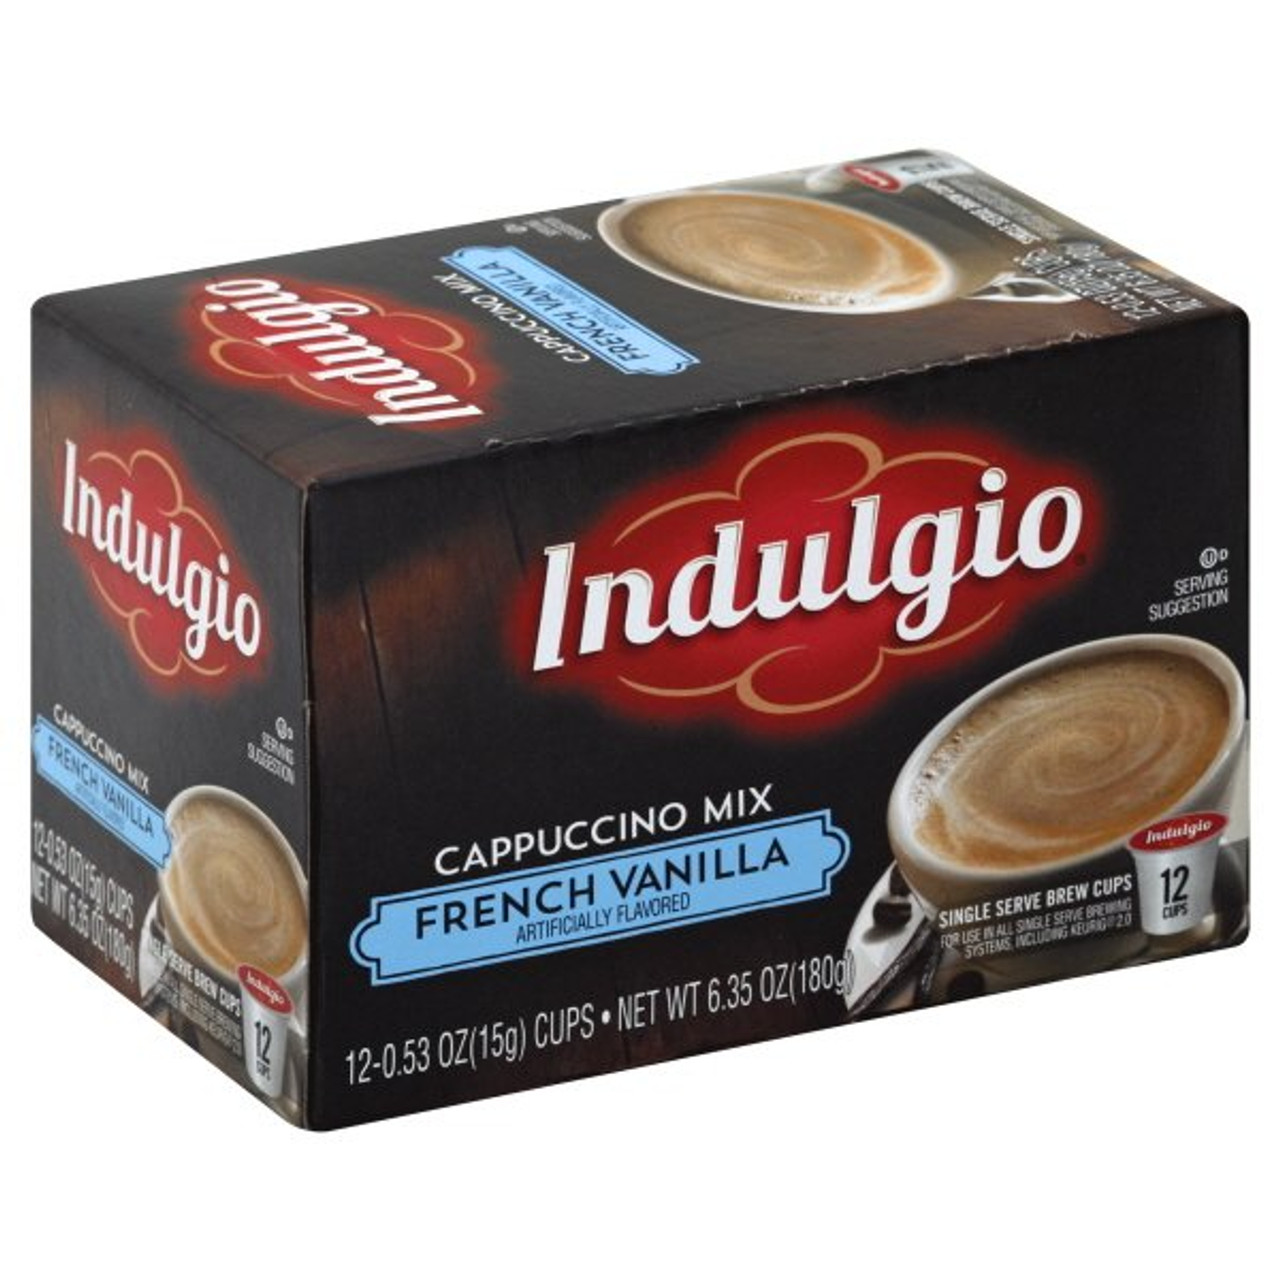 https://cdn11.bigcommerce.com/s-ociv471unf/images/stencil/1280x1280/products/1445/1646/_French_Vanilla_flavored_Cappuccino_Indulgio_French_Vanilla_Cappuccino_2__37558.1655947432.jpg?c=2